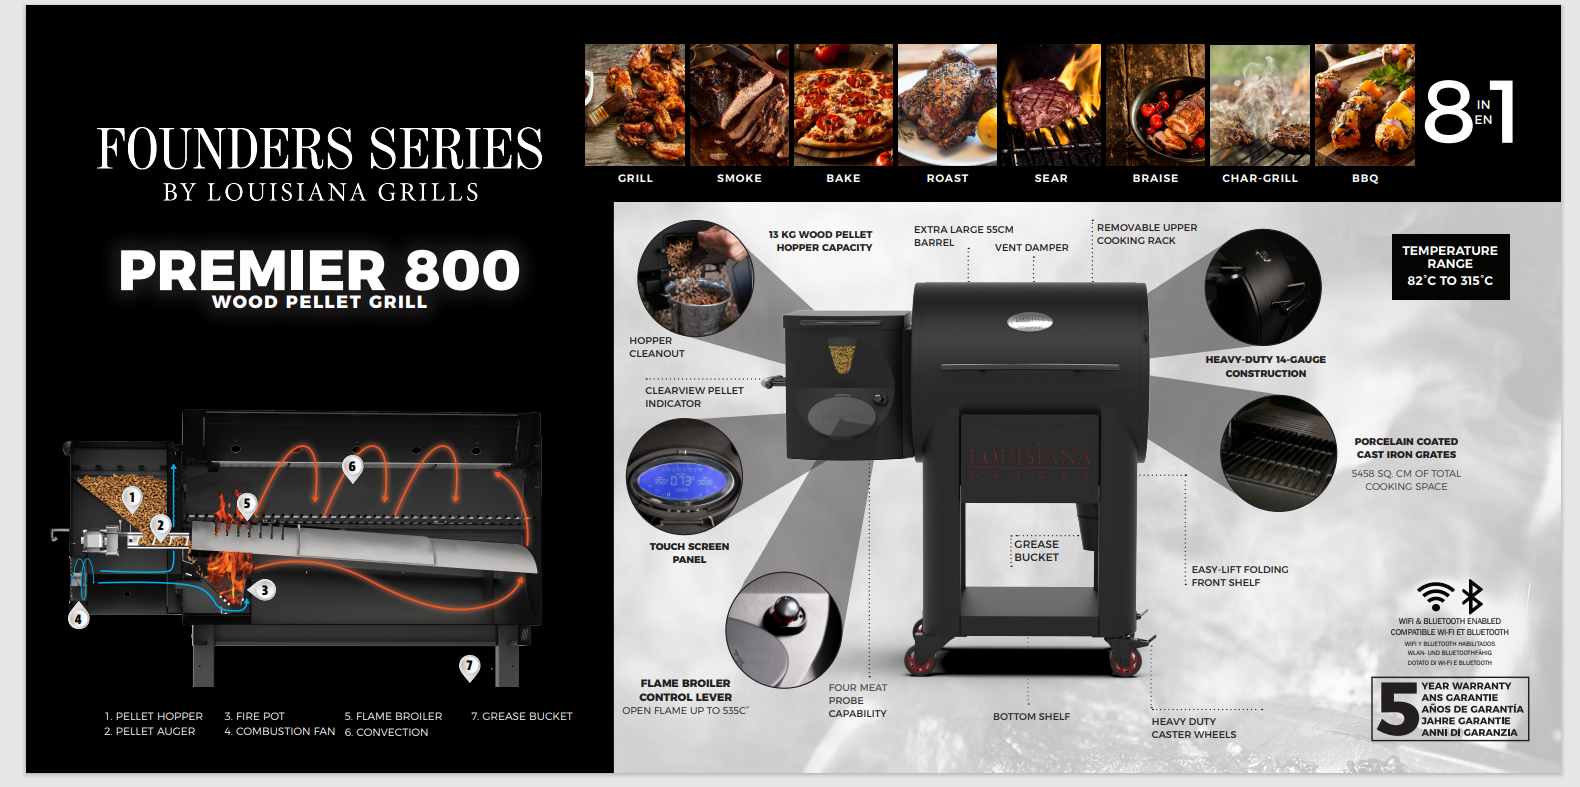 Louisiana Pellet Grills Founder Series 800 c/w iconnect and wifi - 129713